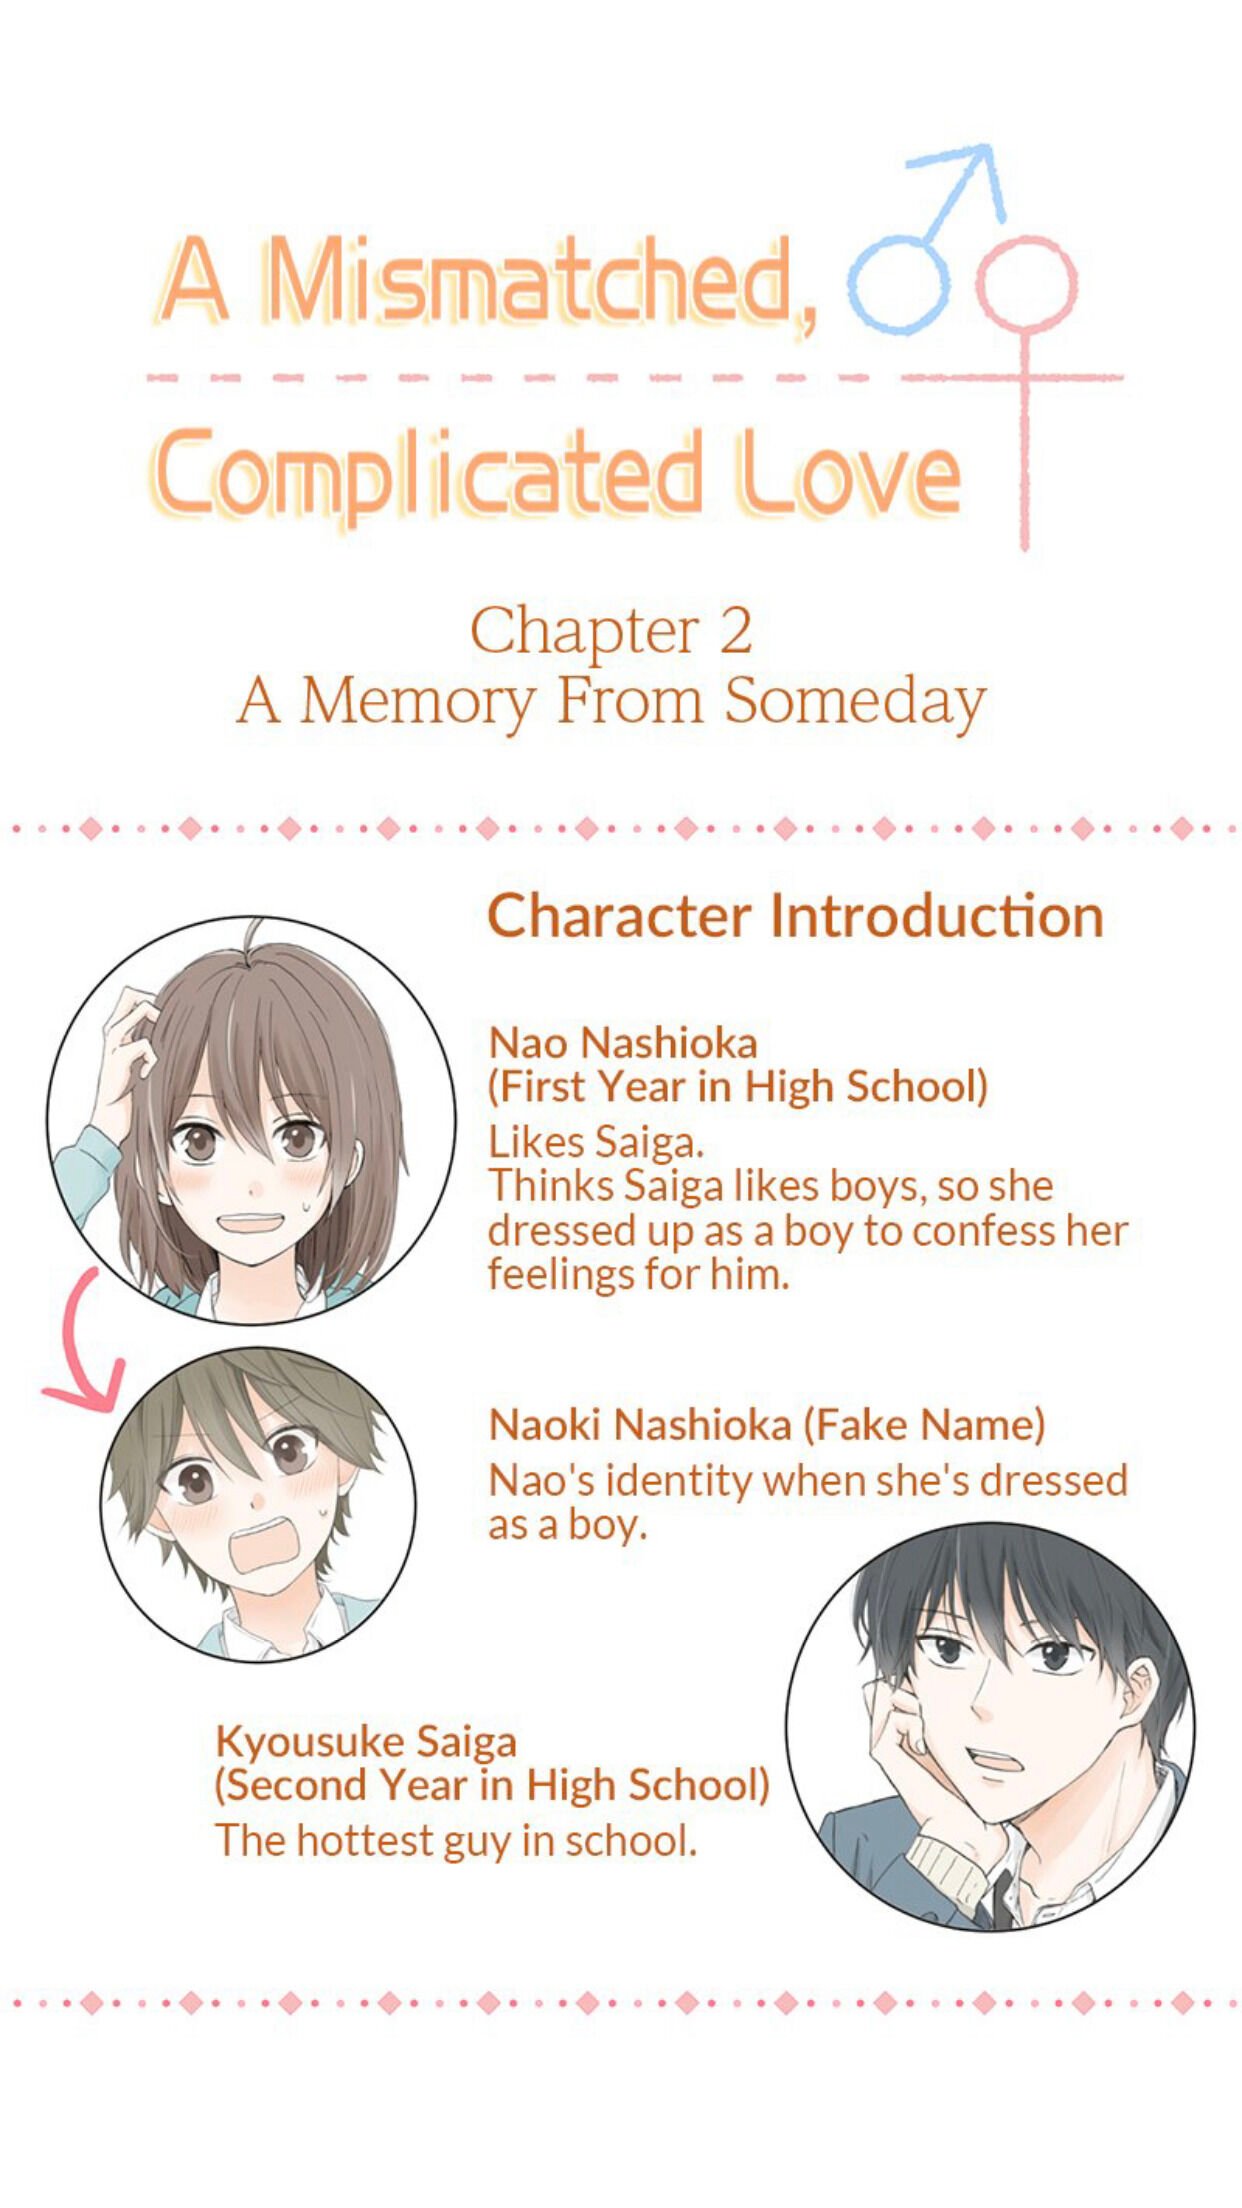 A Mismatched Complicated Love chapter 2